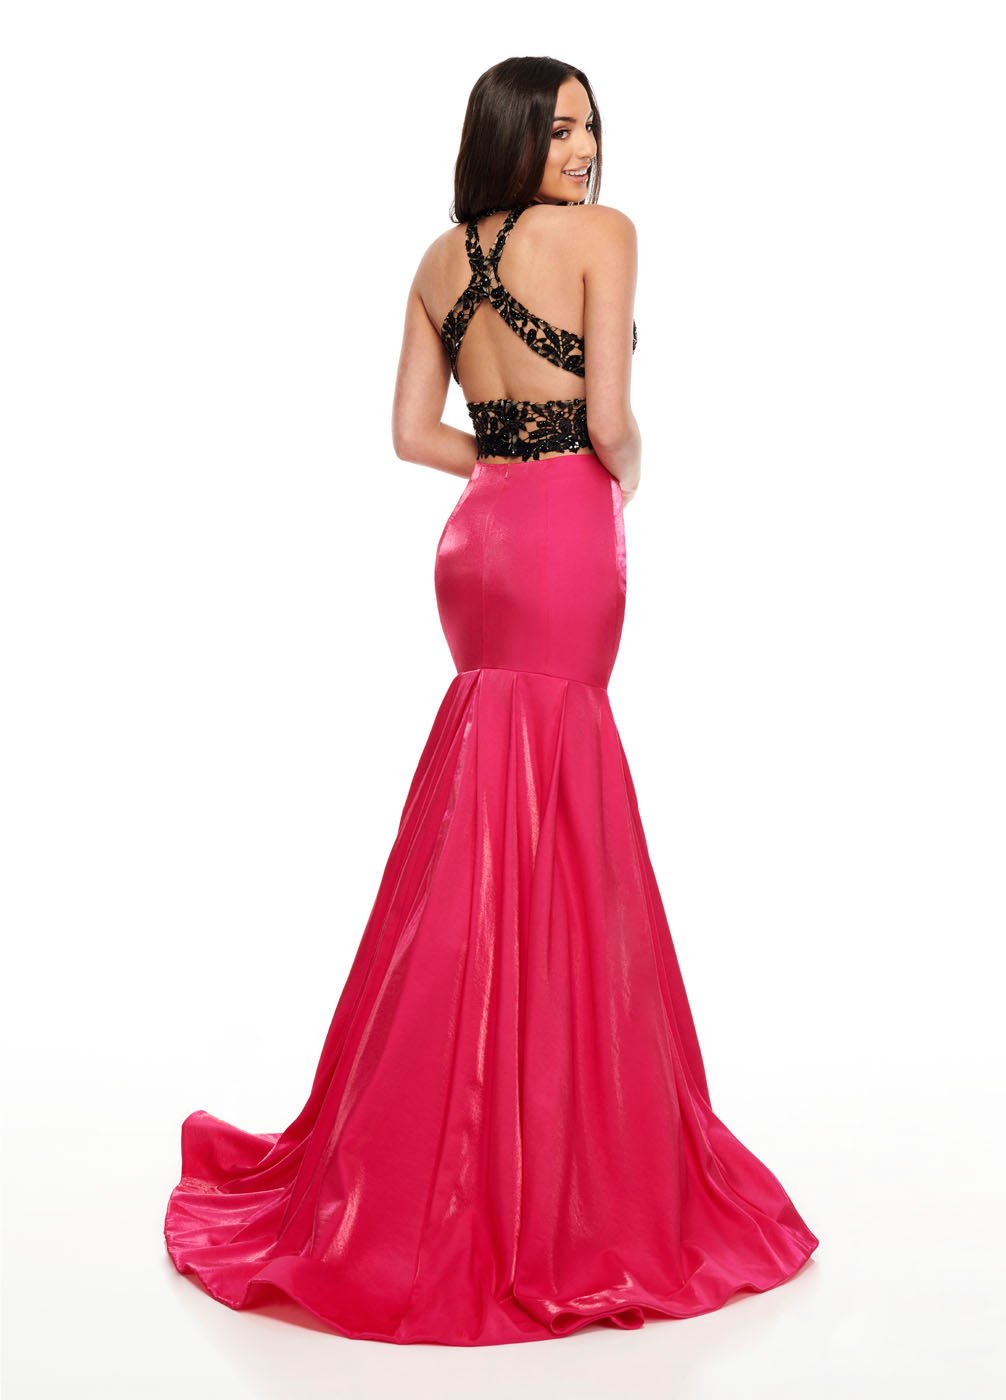 Rachel Allan 7151 dress images in these colors: Black Fuchsia, Black White, Red.